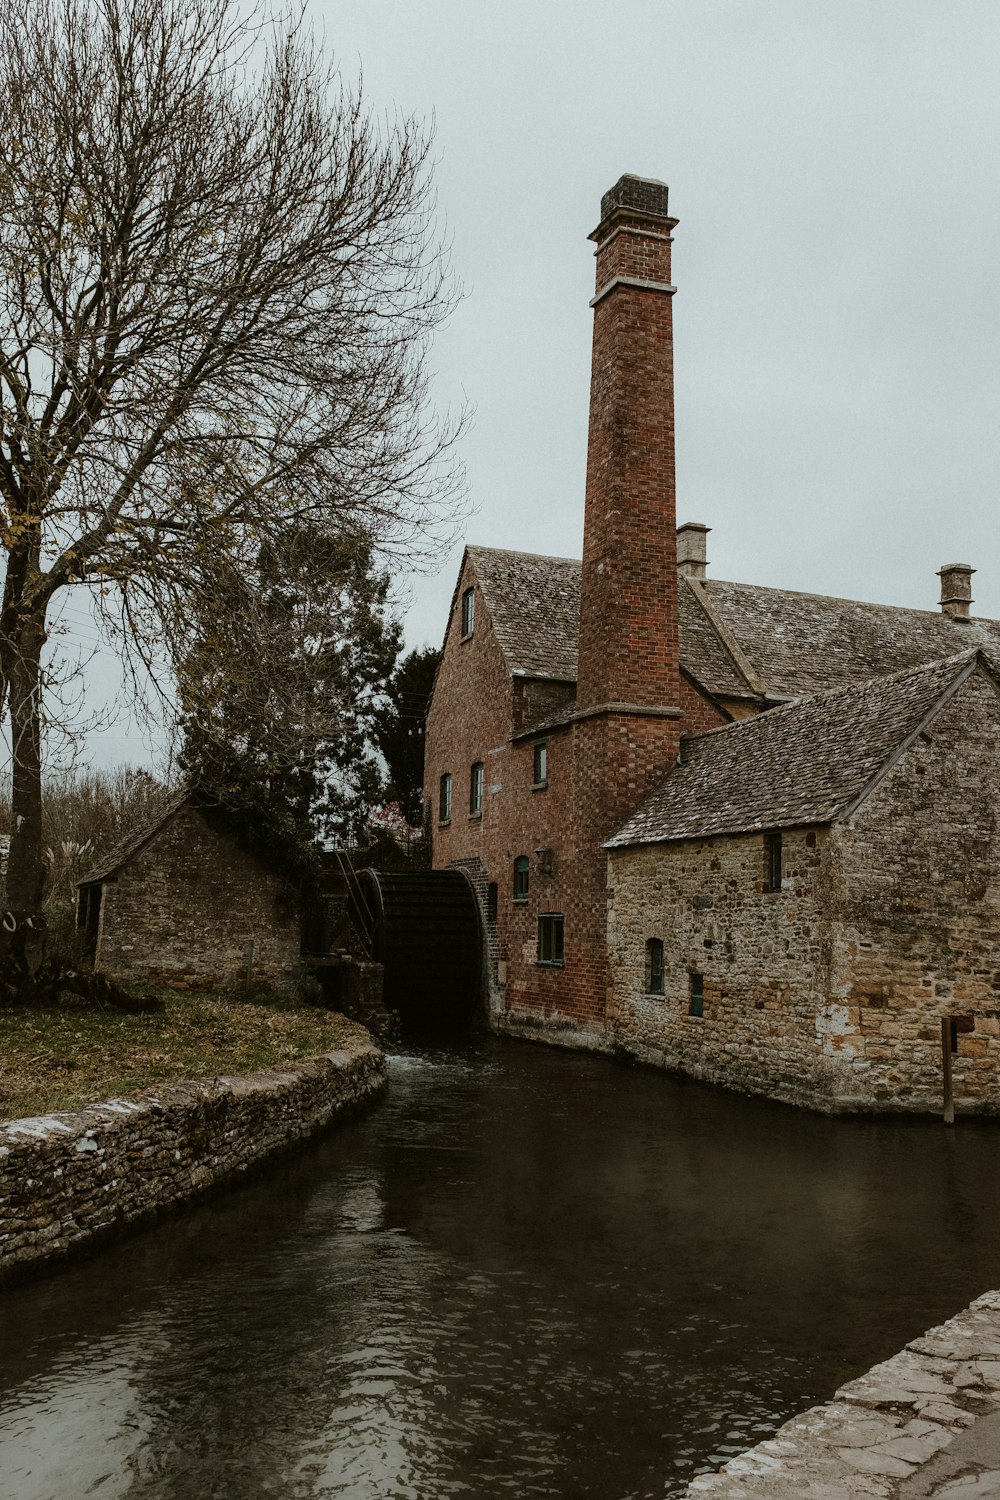 an old brick building next to a river